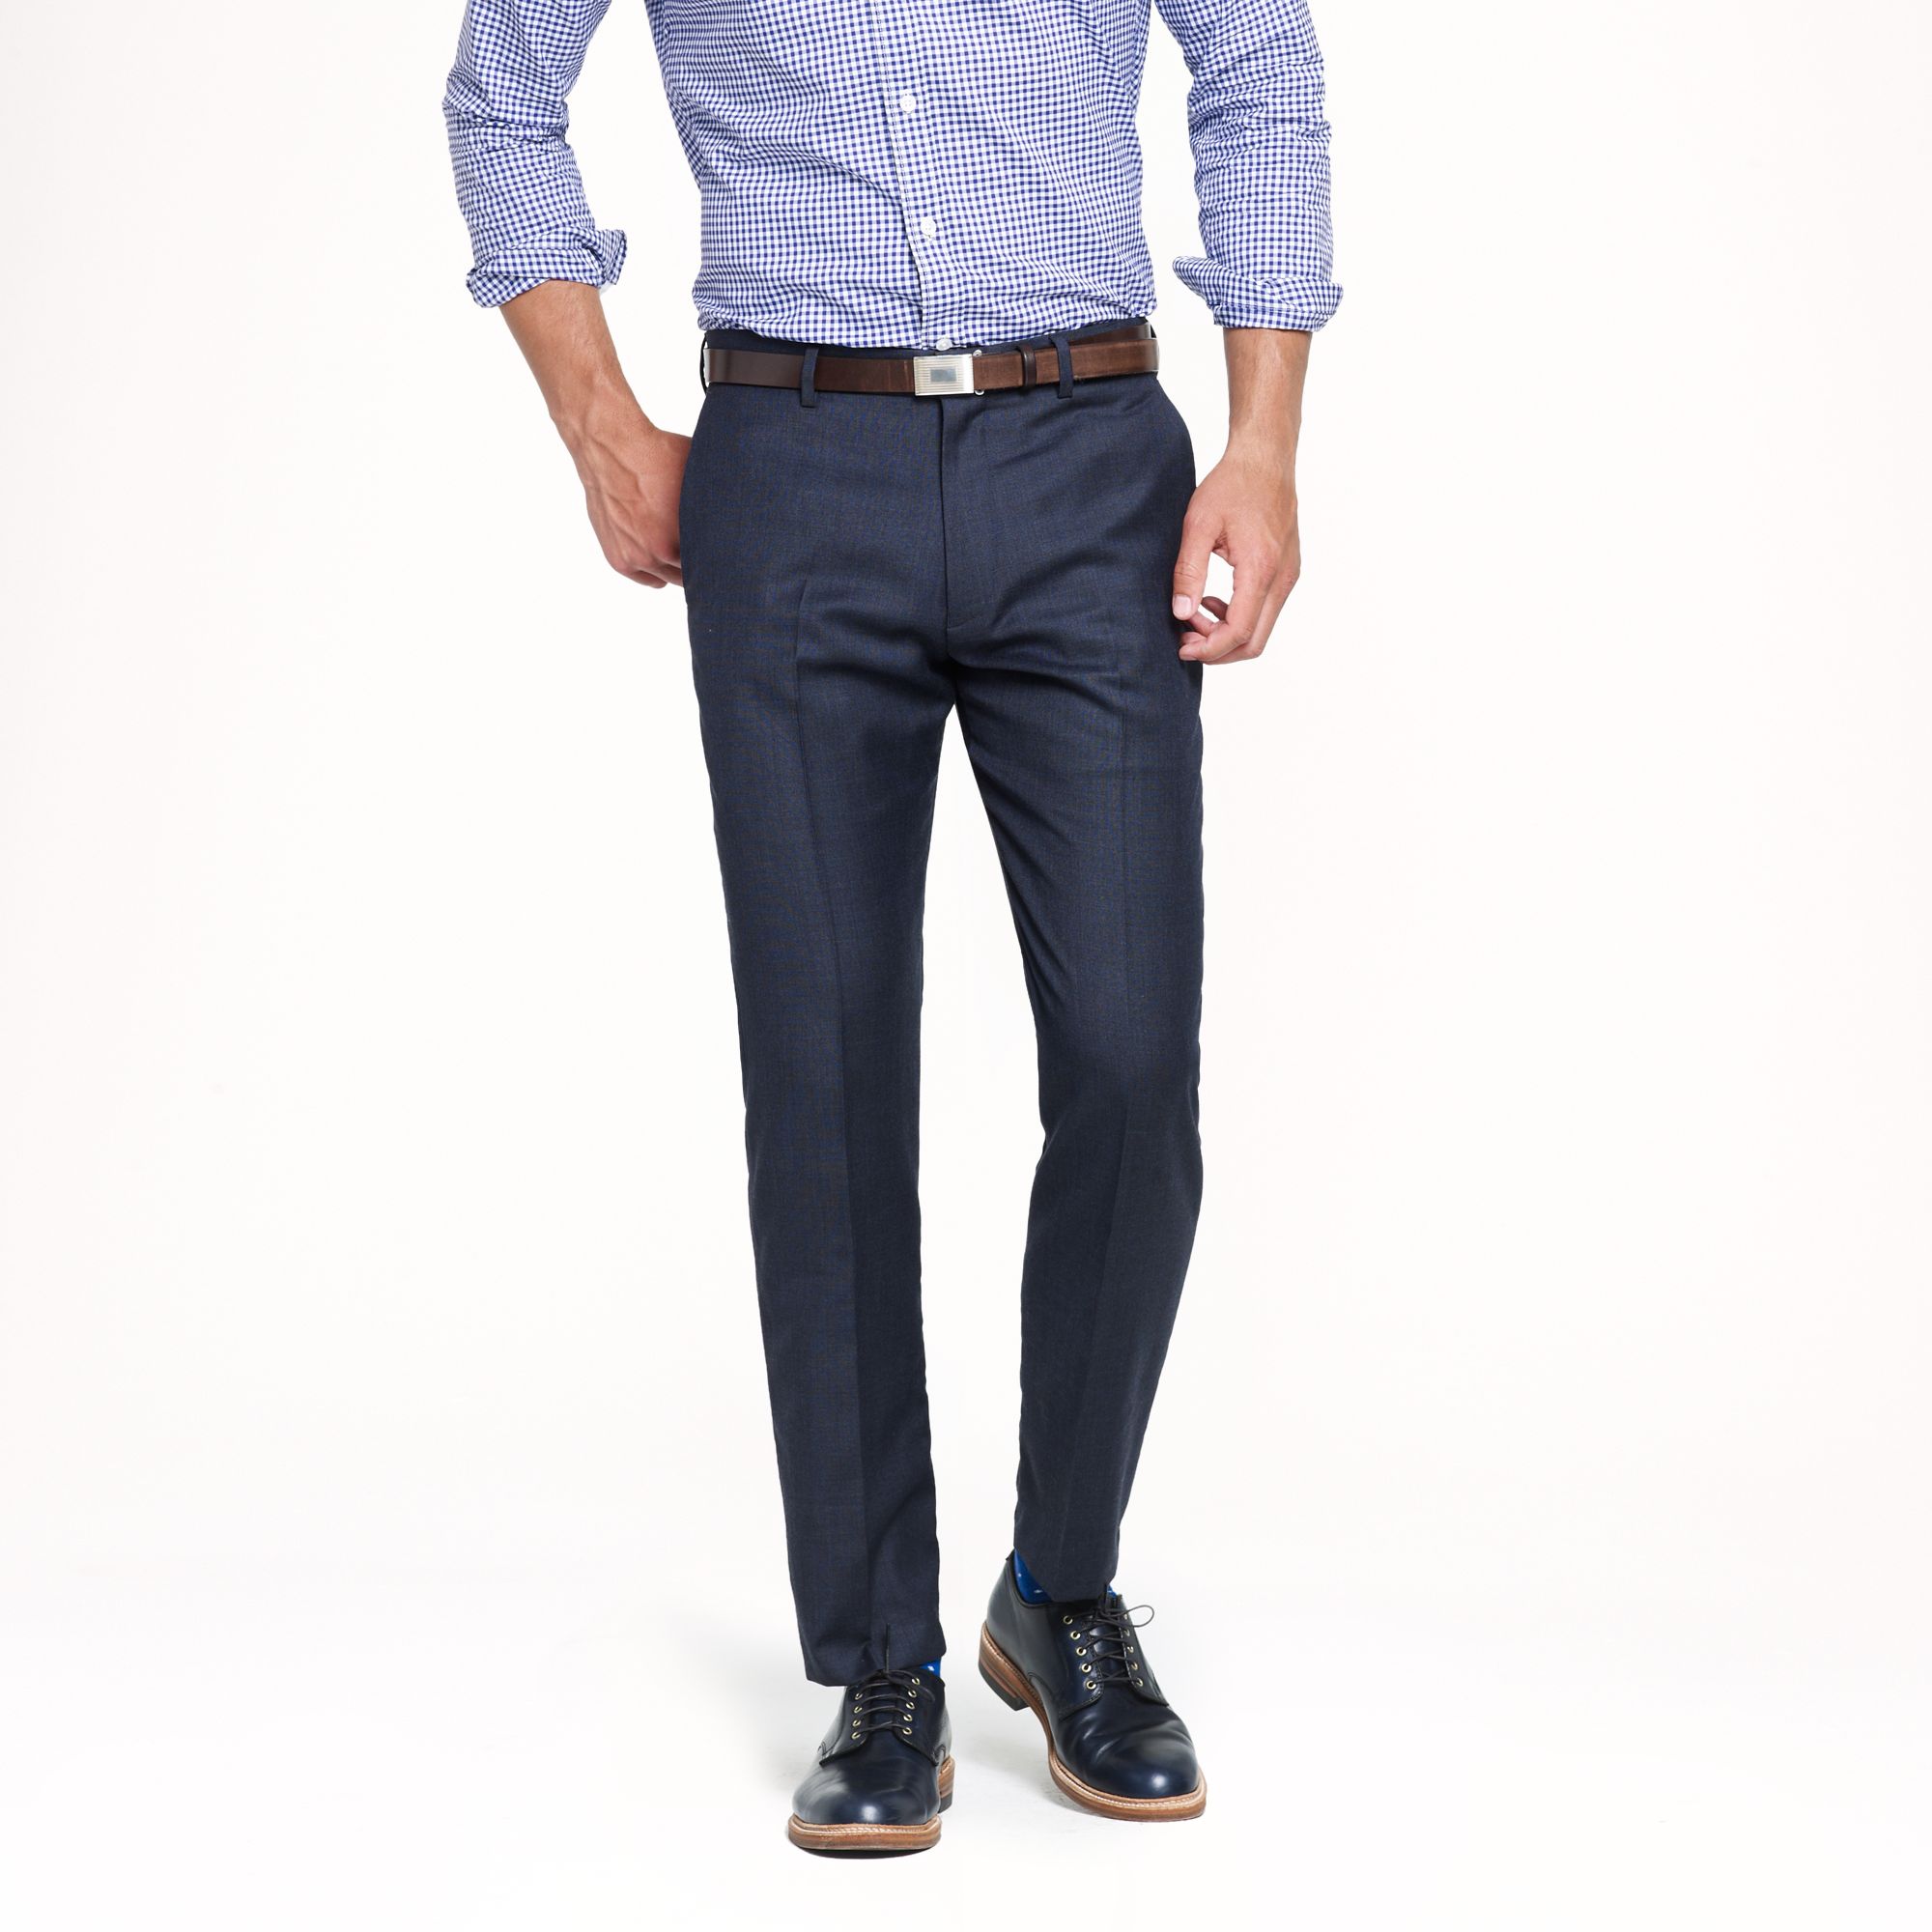 J.crew Ludlow Classic Suit Pant in Italian Worsted Wool in Blue for Men ...